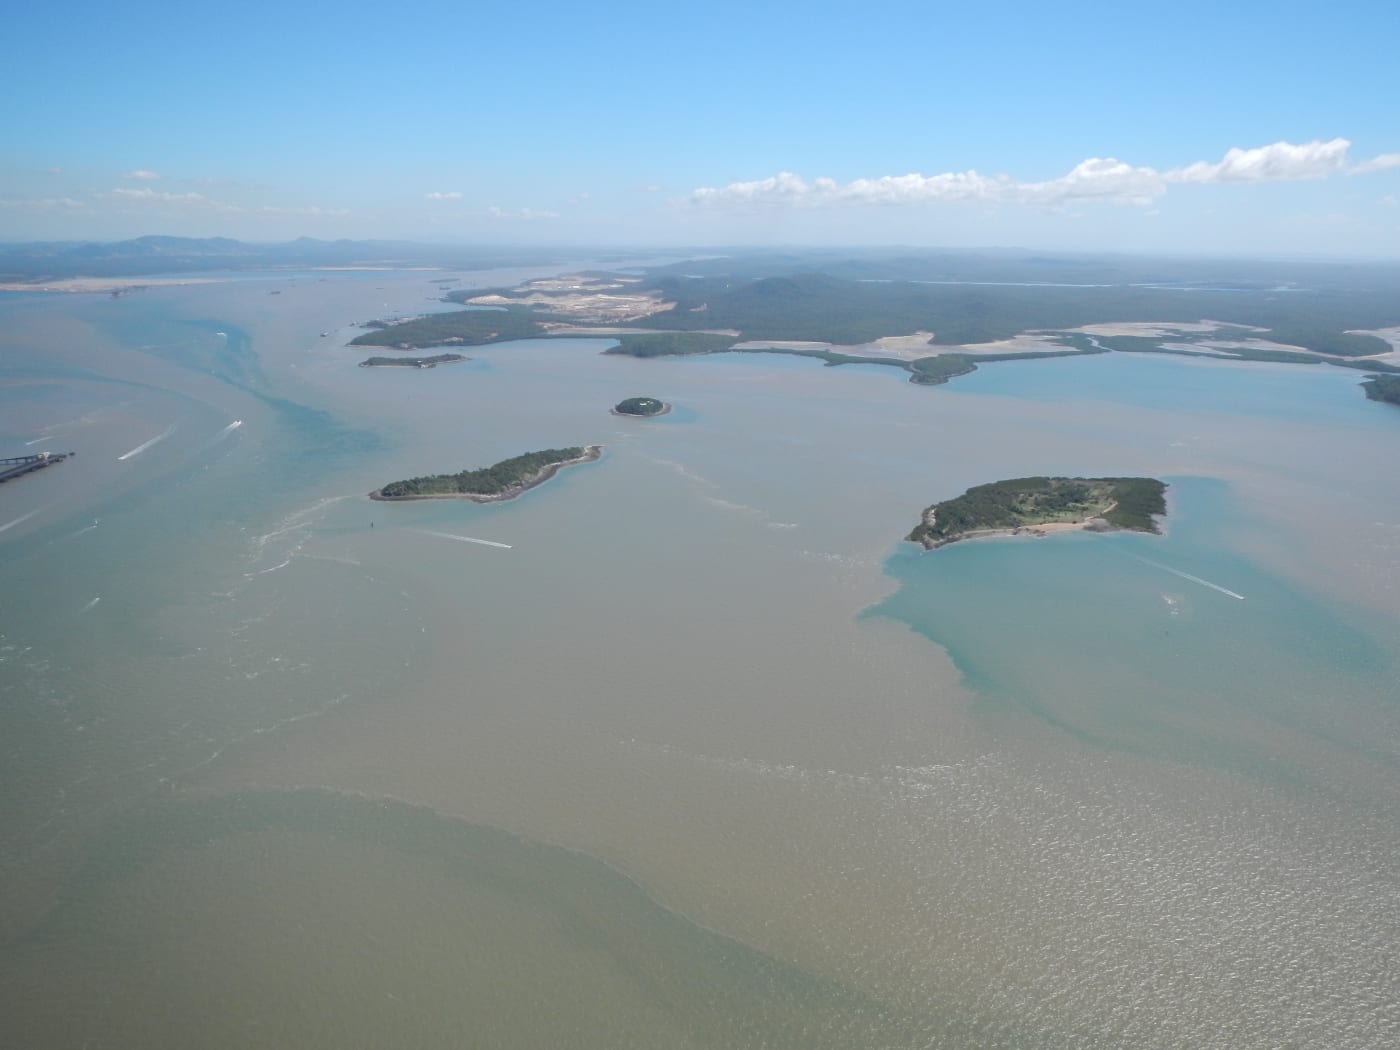 Sediment plumes from dredging associated with the further development of the harbour. Gladstone Harbour, Queensland